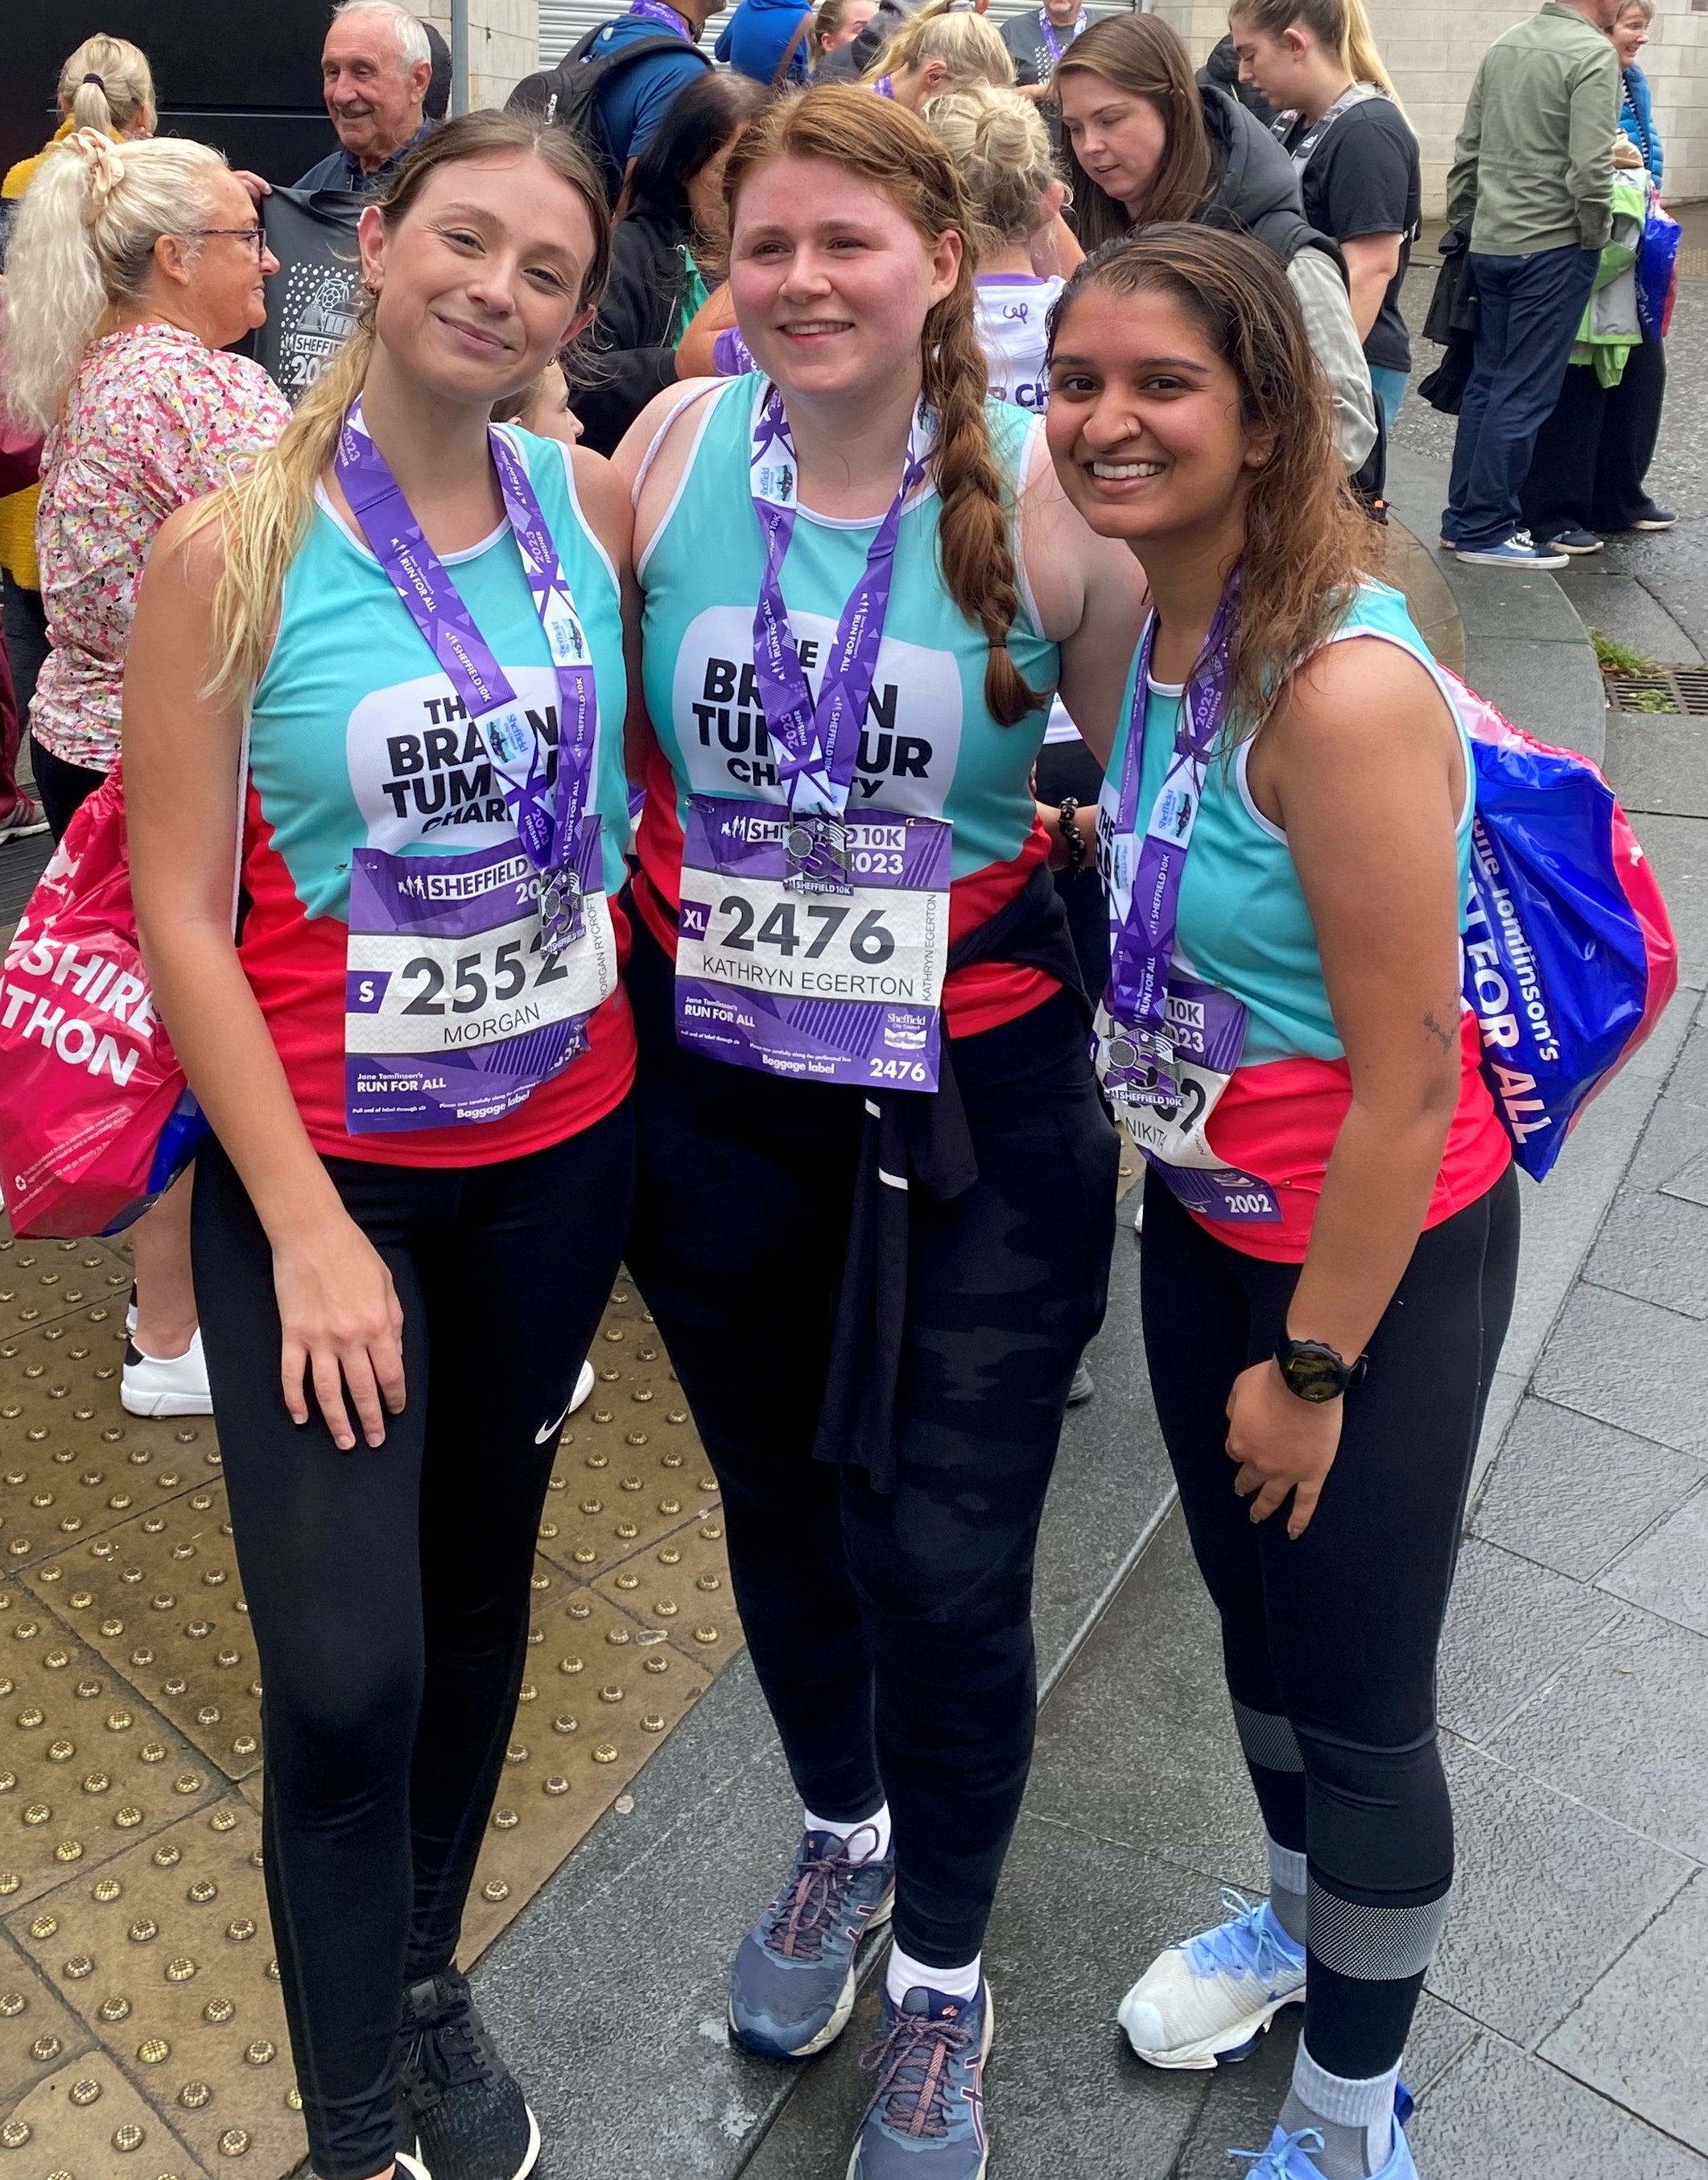 Morgan (left) ran the Sheffield 10k to raise money for the Brain Tumour Charity. She is pictured here with Nikky (right) and Kathryn